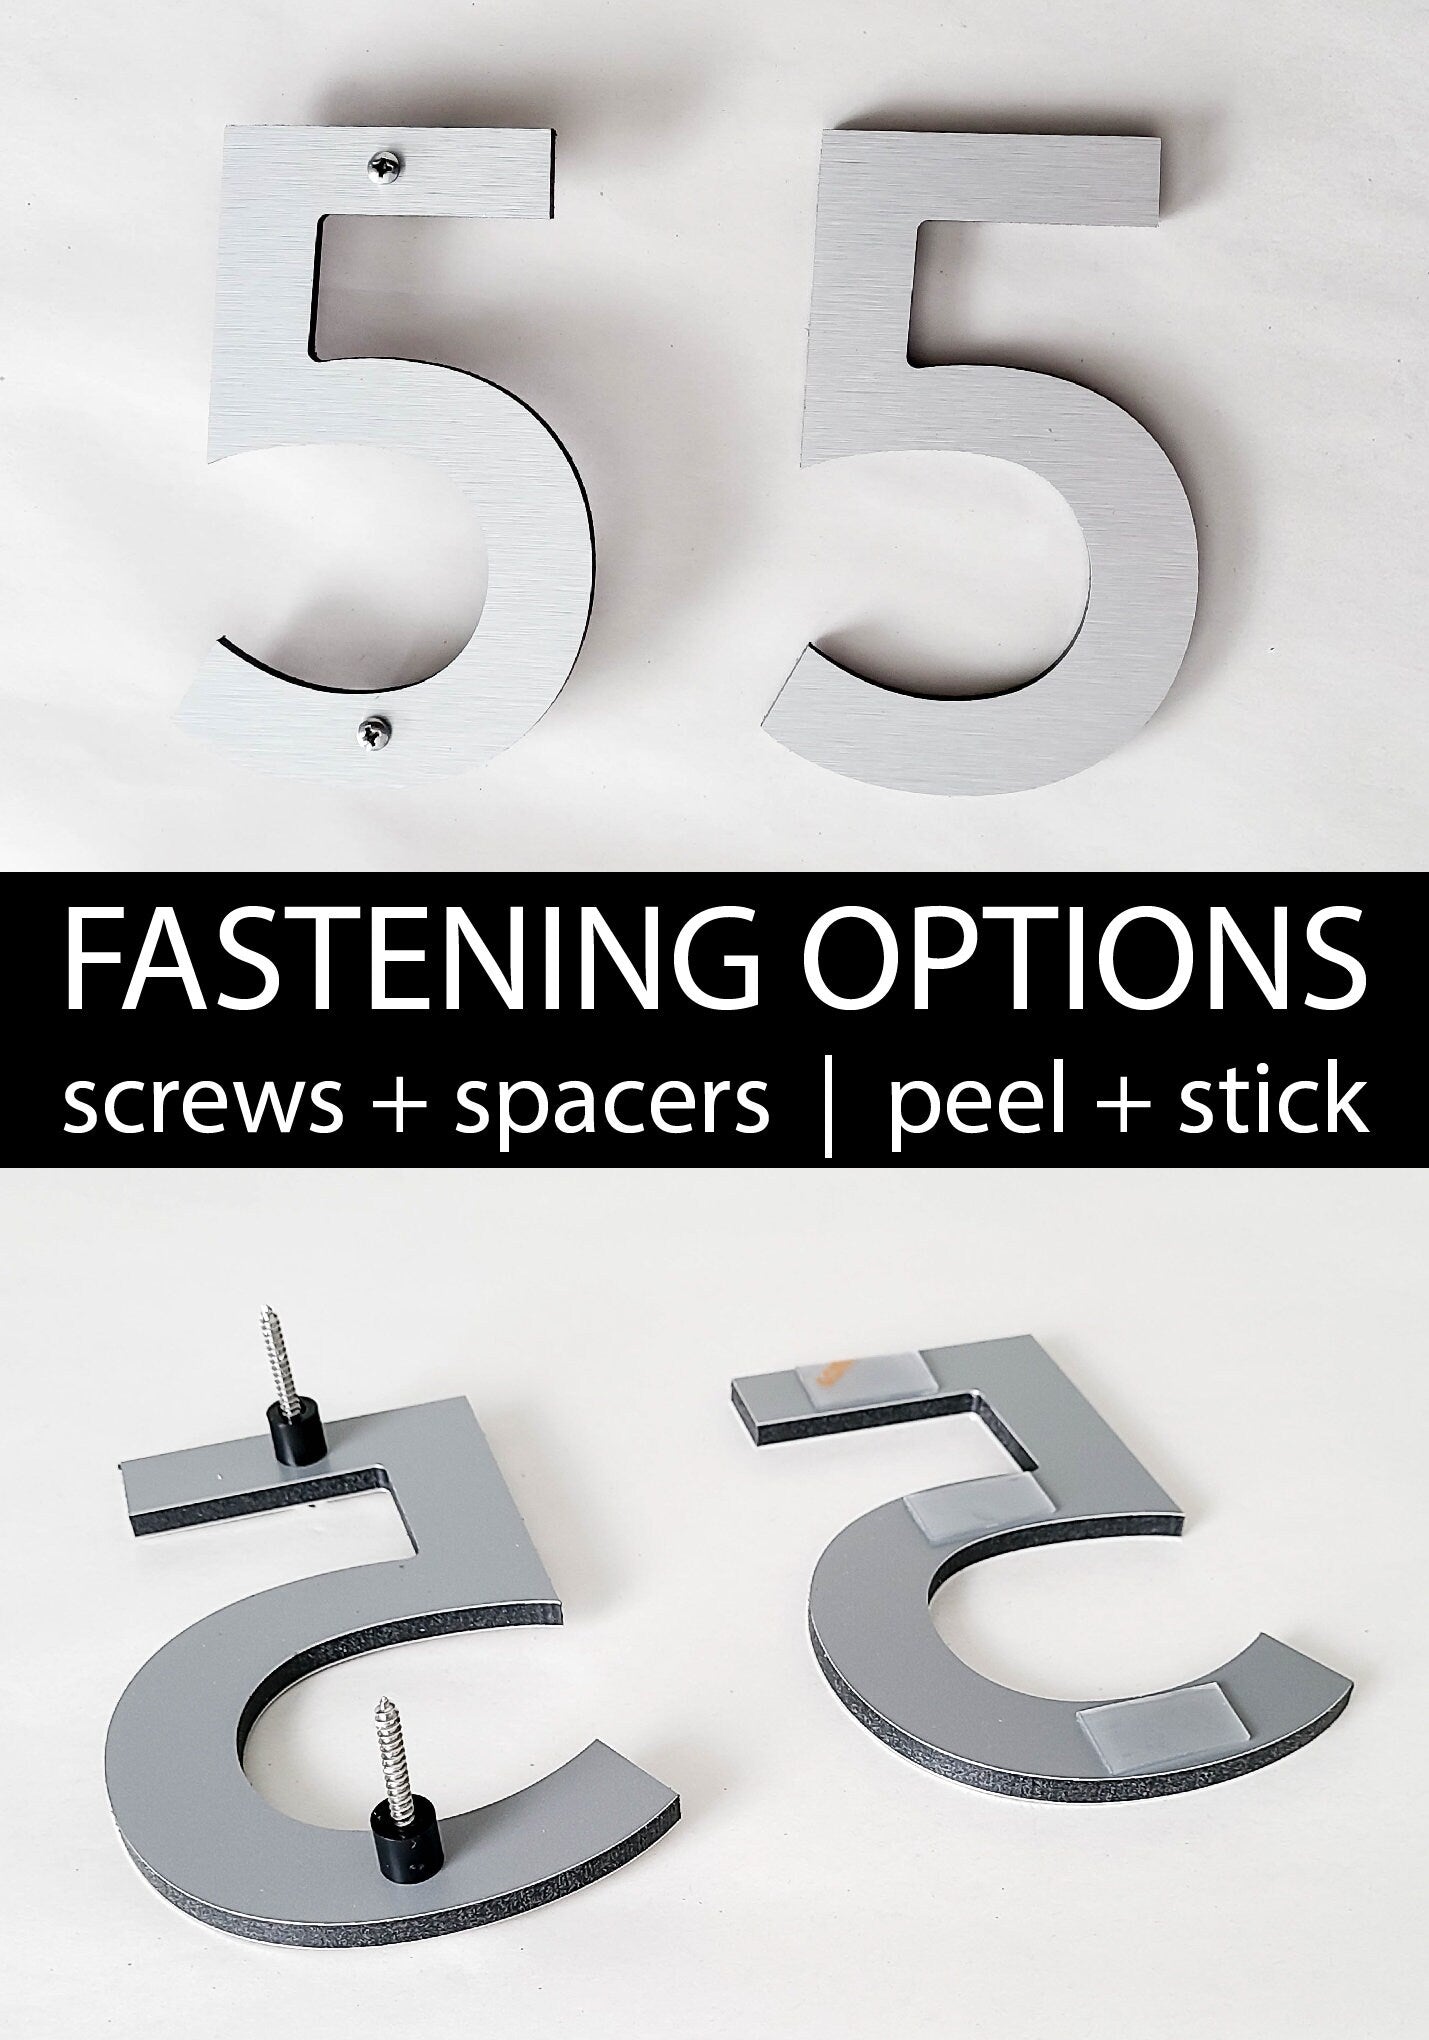 brushed silver CLASSIC MODERN house numbers fastening options